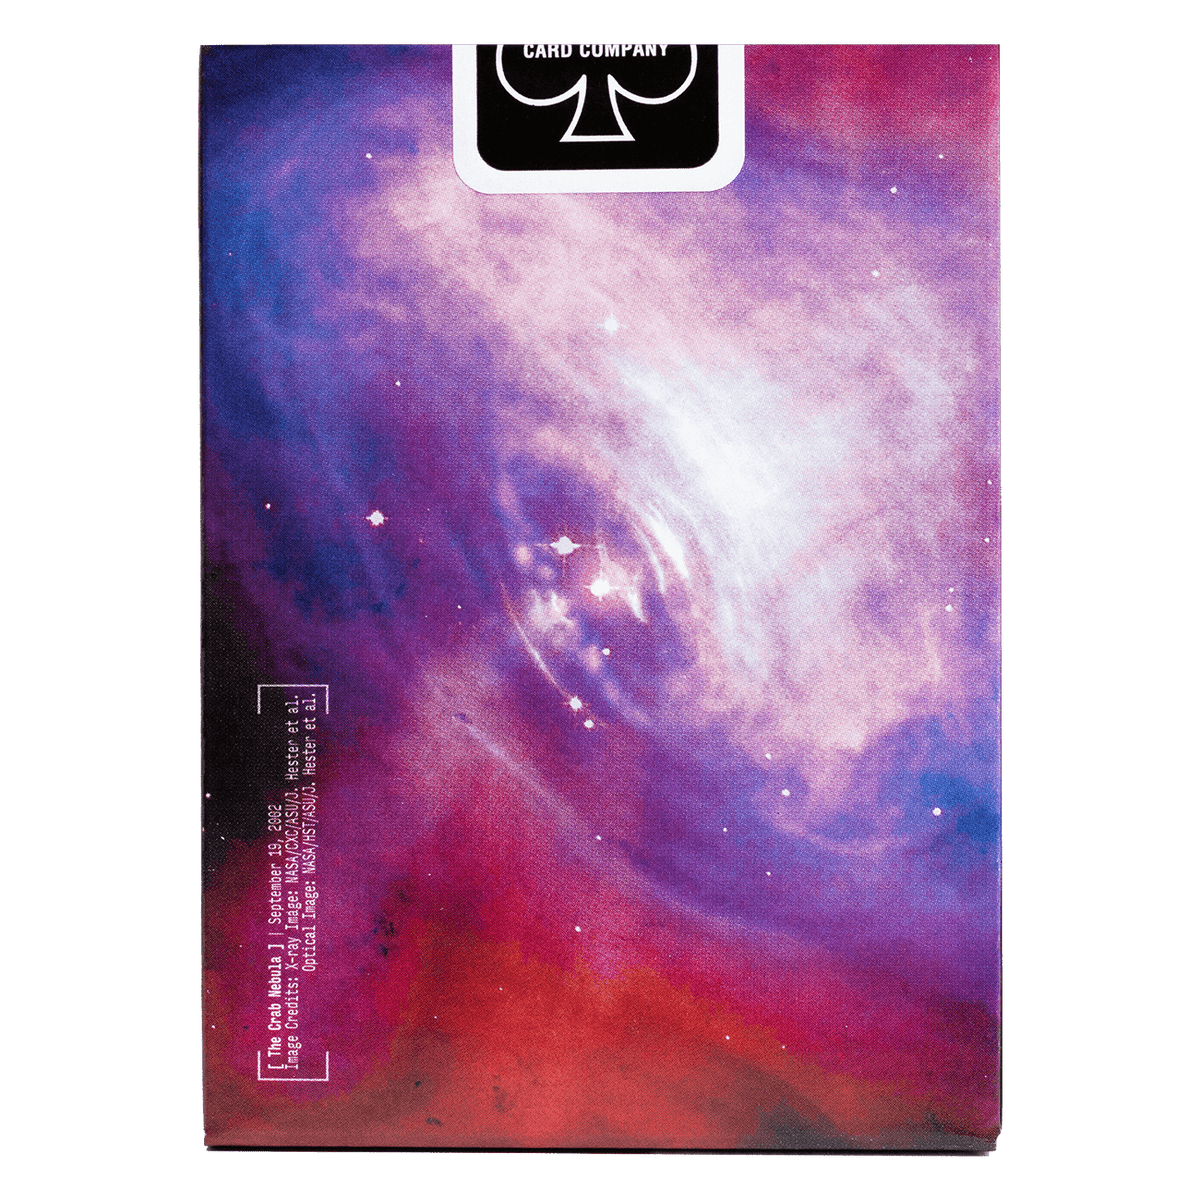 Bicycle Stargazer 201 Playing Cards-Stargazer 201-United States Playing Cards Company-Ace Cards &amp; Collectibles